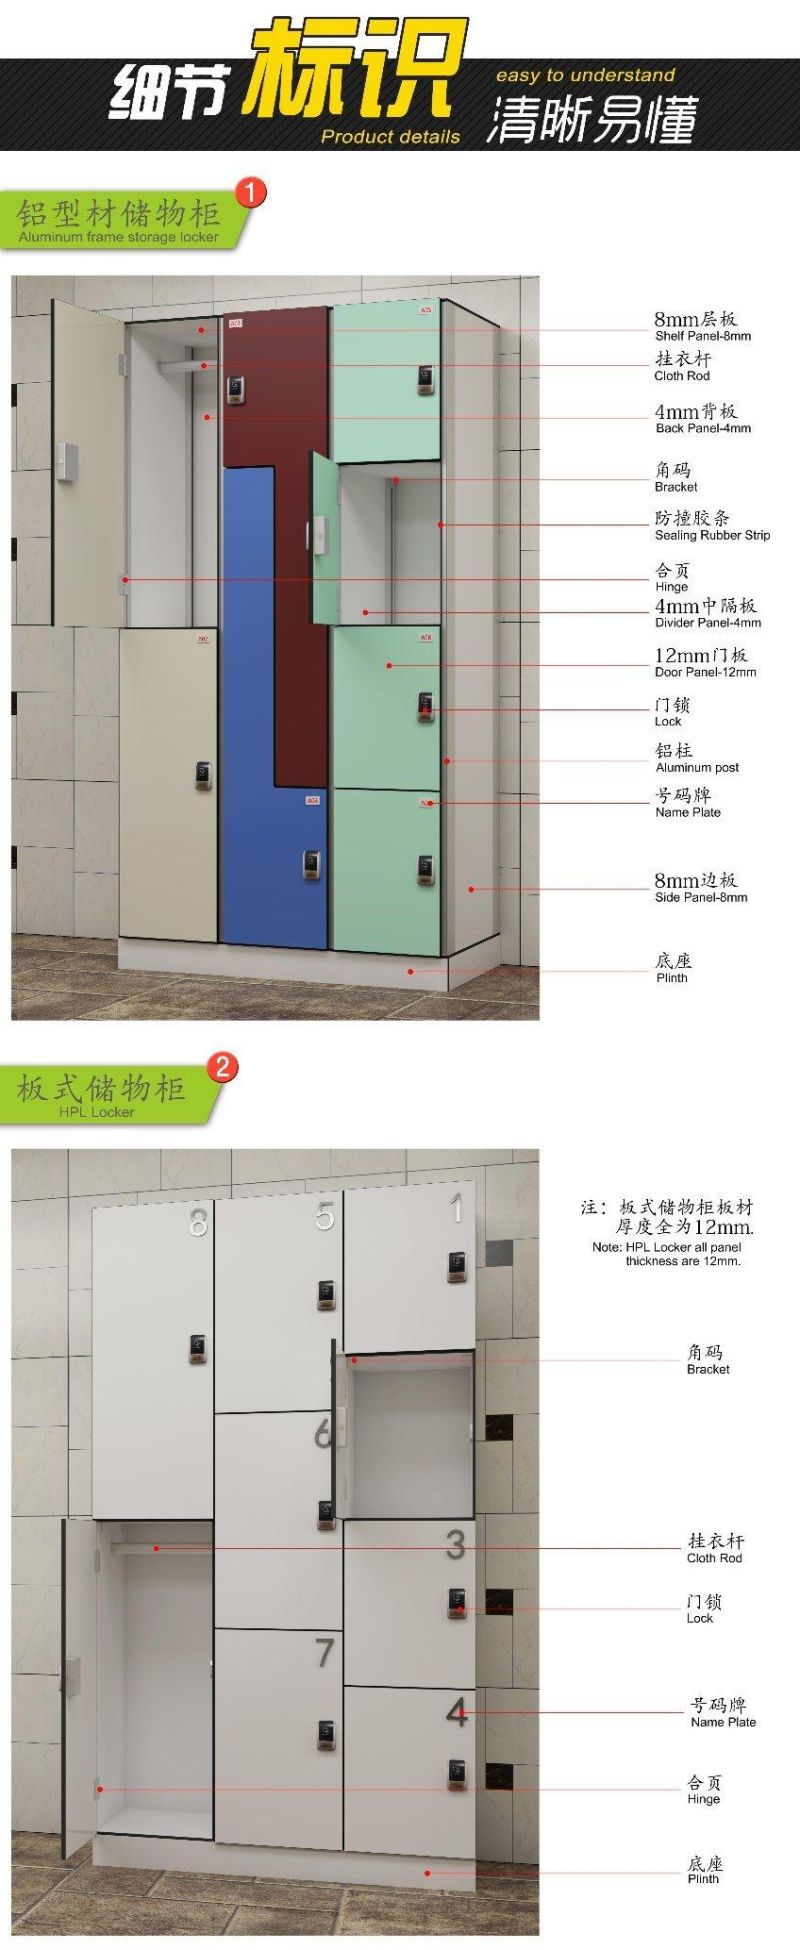 Compact Laminate Gym Locker, HPL Lockers Cabinet for Changing Room